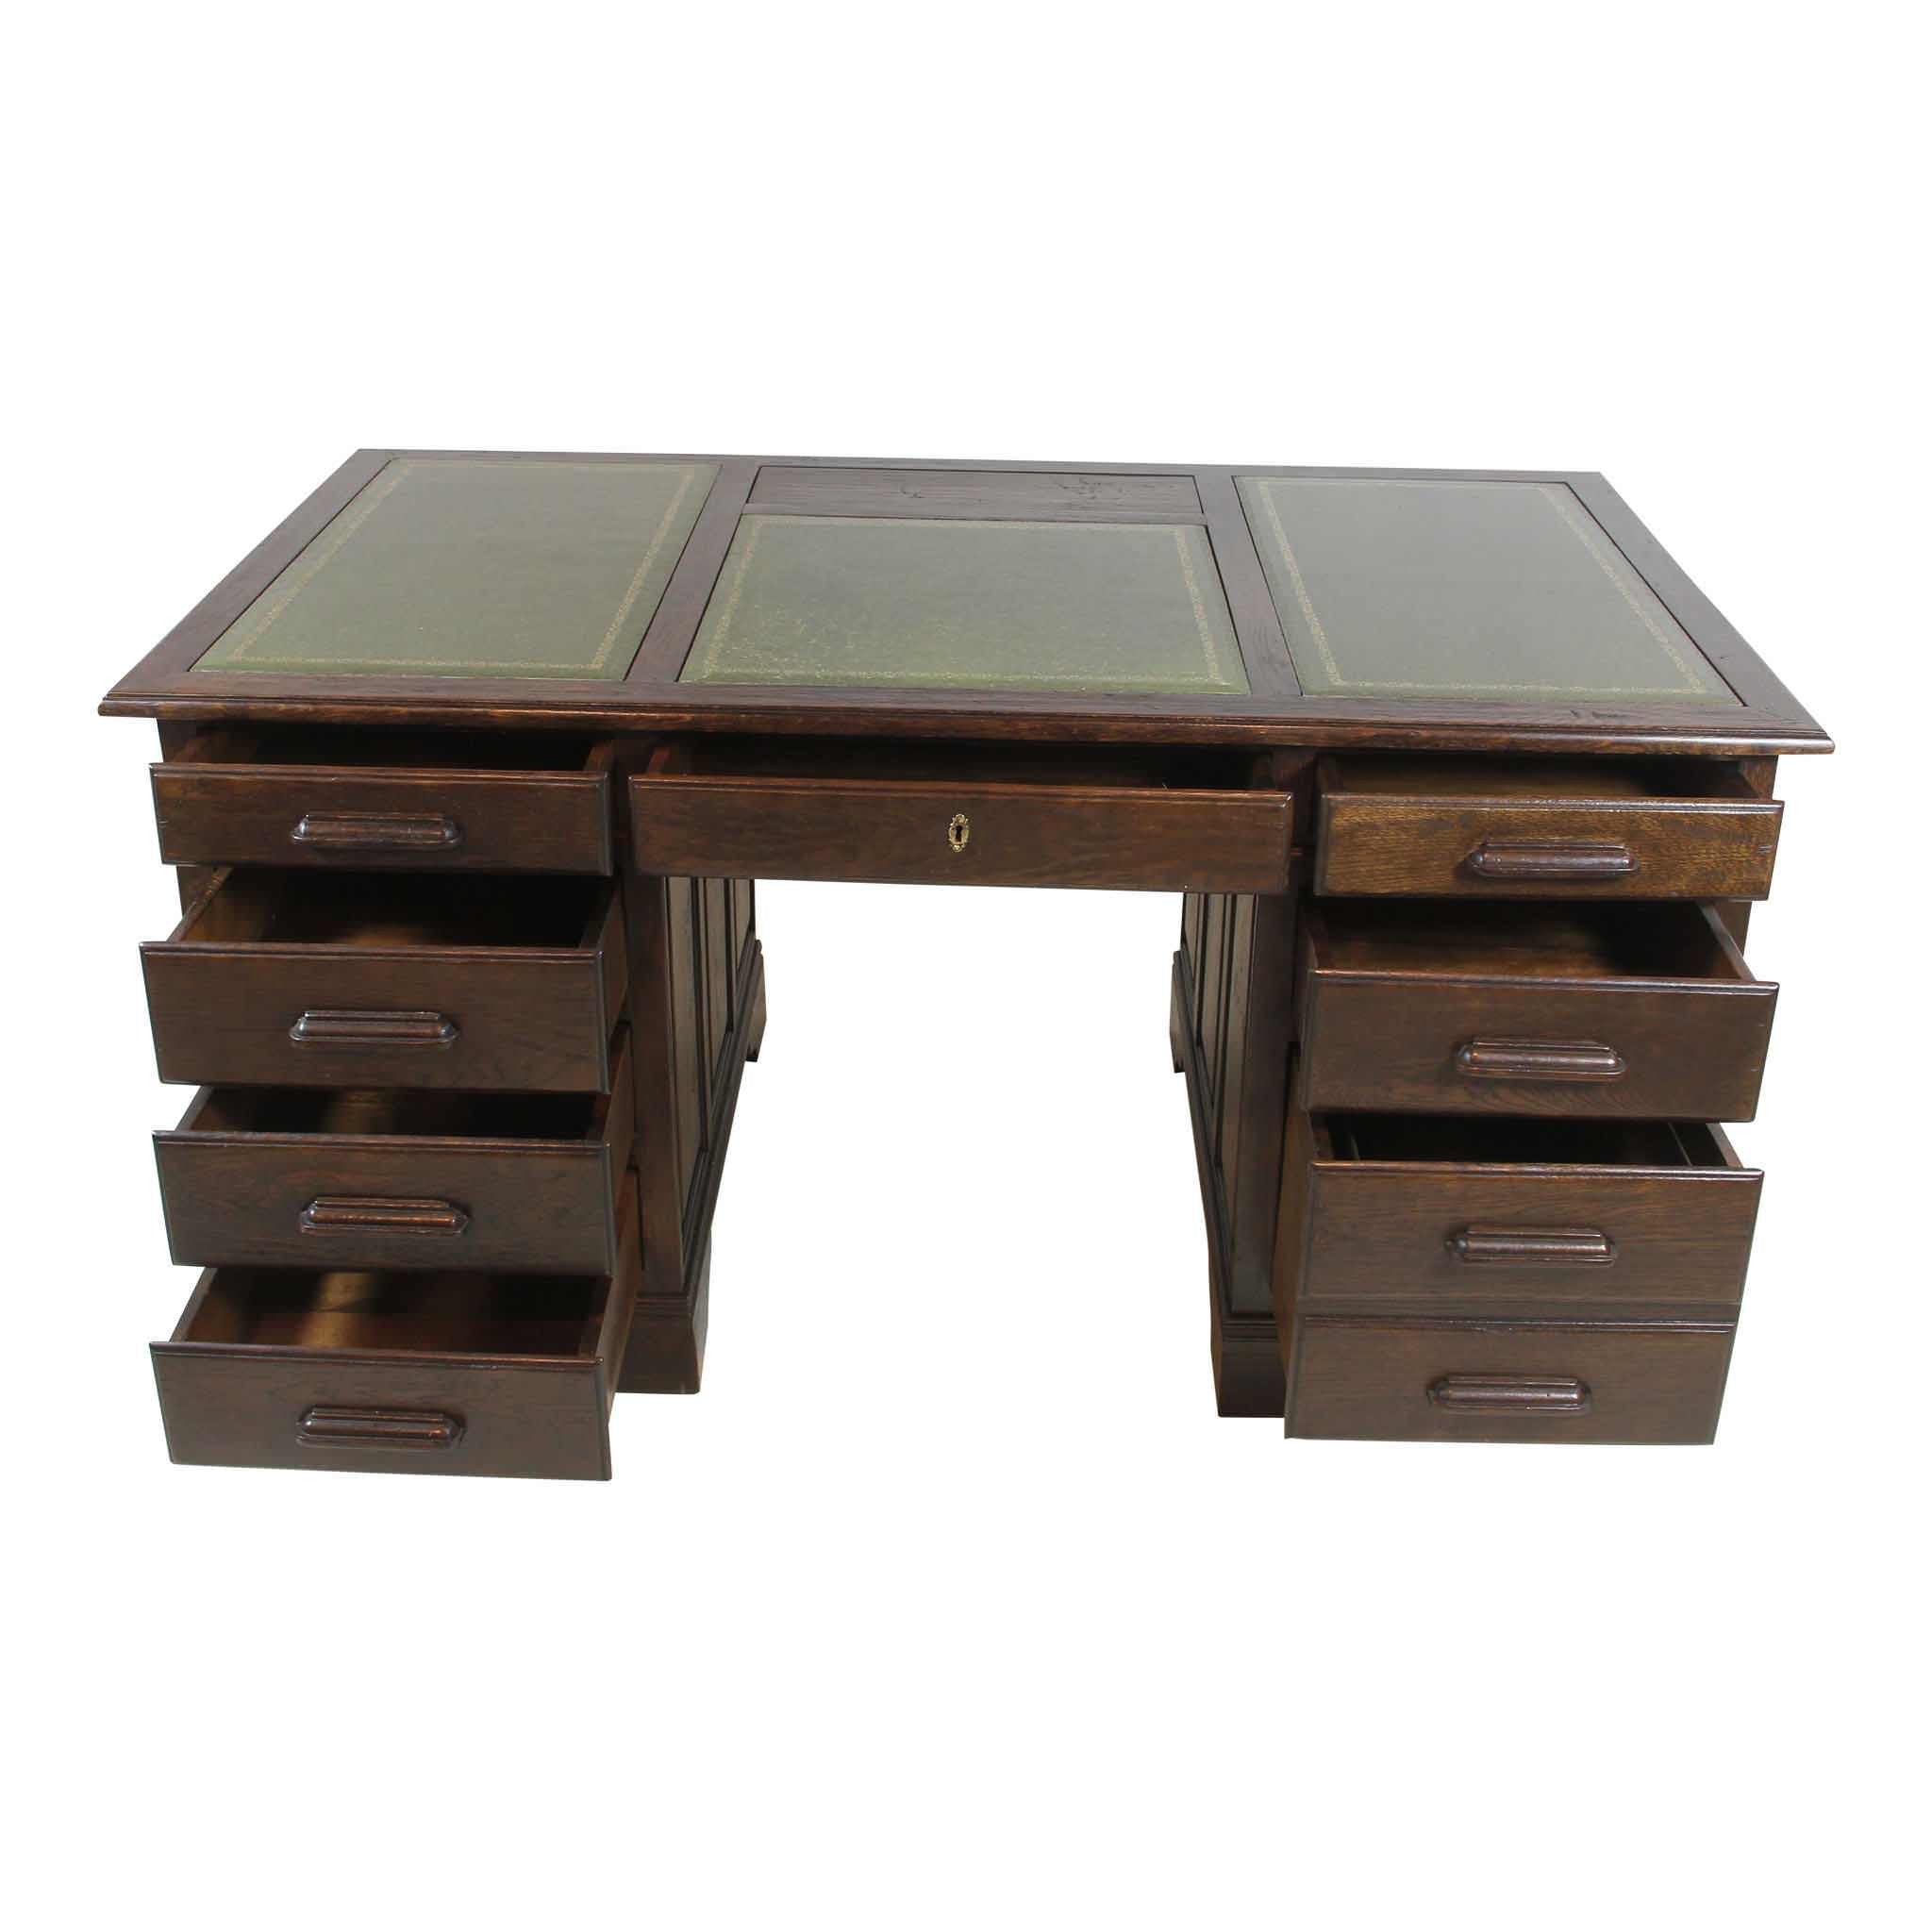 English Desk with Leather Top